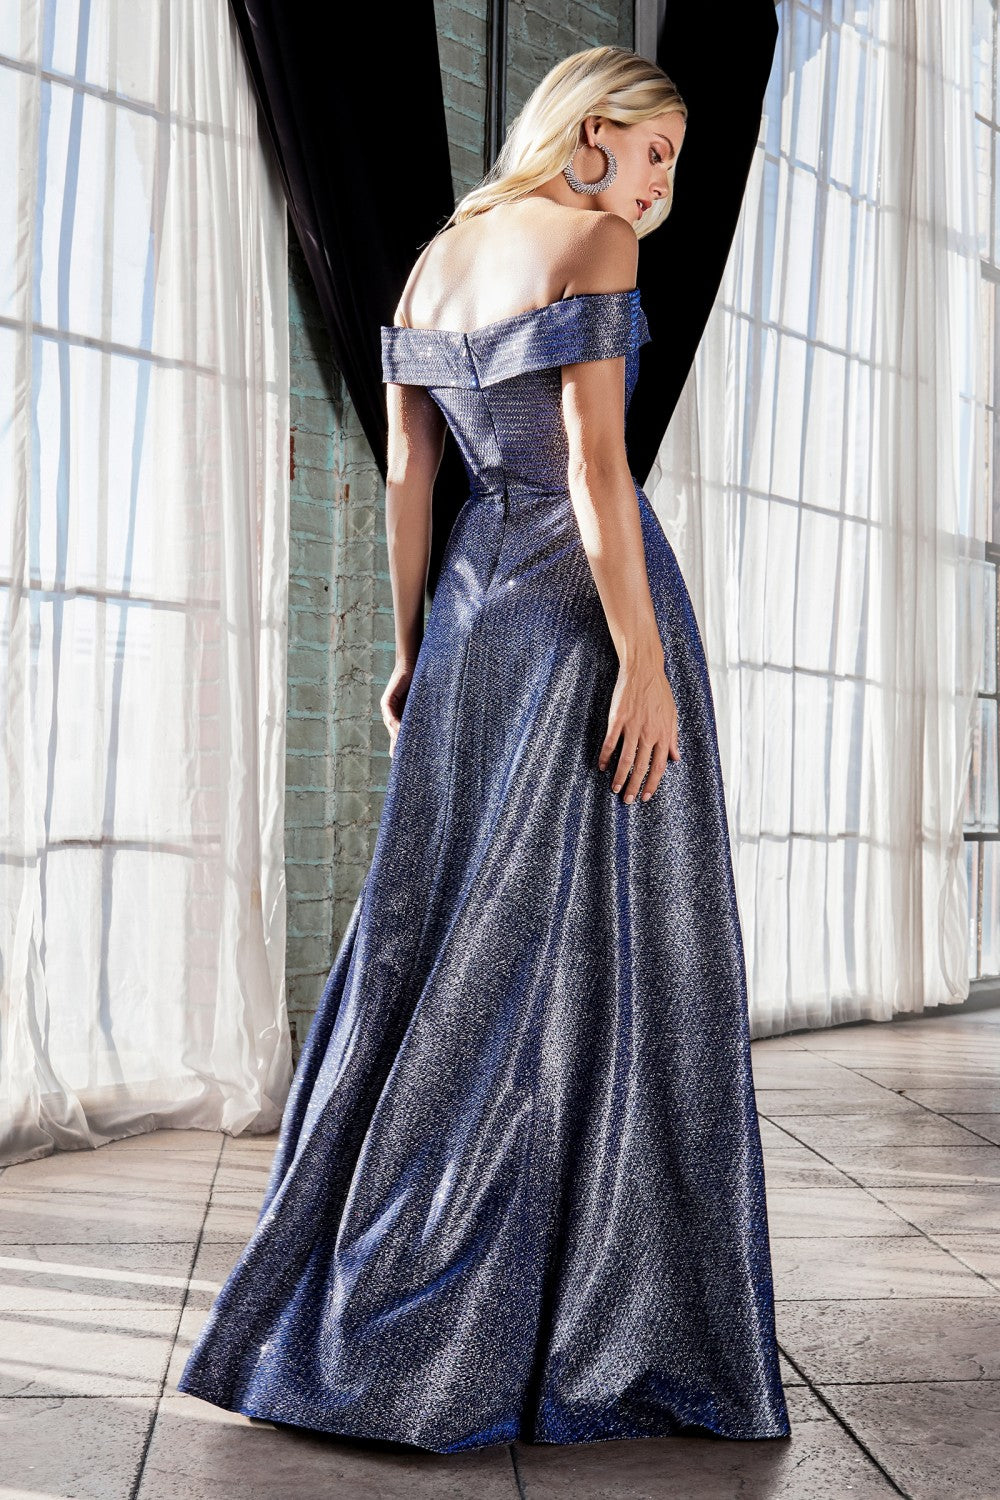 MyFashion.com - Off the shoulder a-line dress with metallic finish and leg slit.(CD162) - Cinderella Divine promdress eveningdress fashion partydress weddingdress 
 gown homecoming promgown weddinggown 